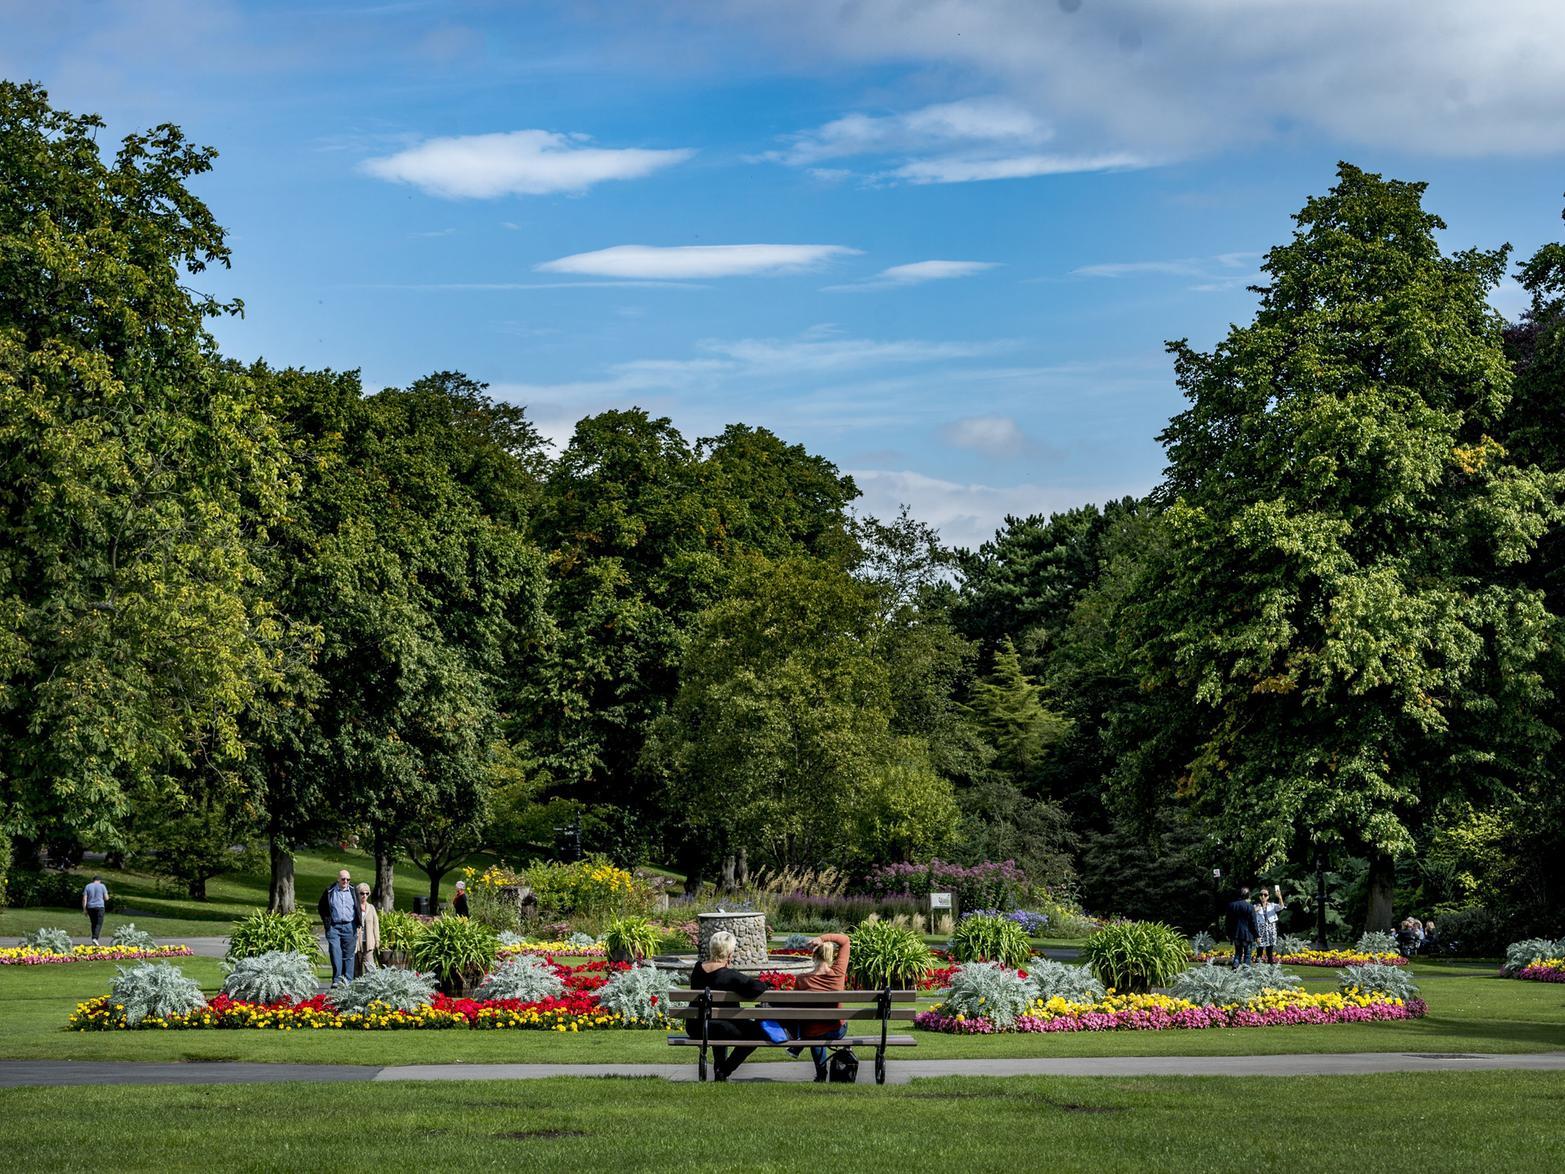 Valley Gardens is an amazing space right in the centre of our town and perfect for getting away from the hustle and bustle of the high street. It provides a great space for the 1940s day to take place and lots of beautiful nature.